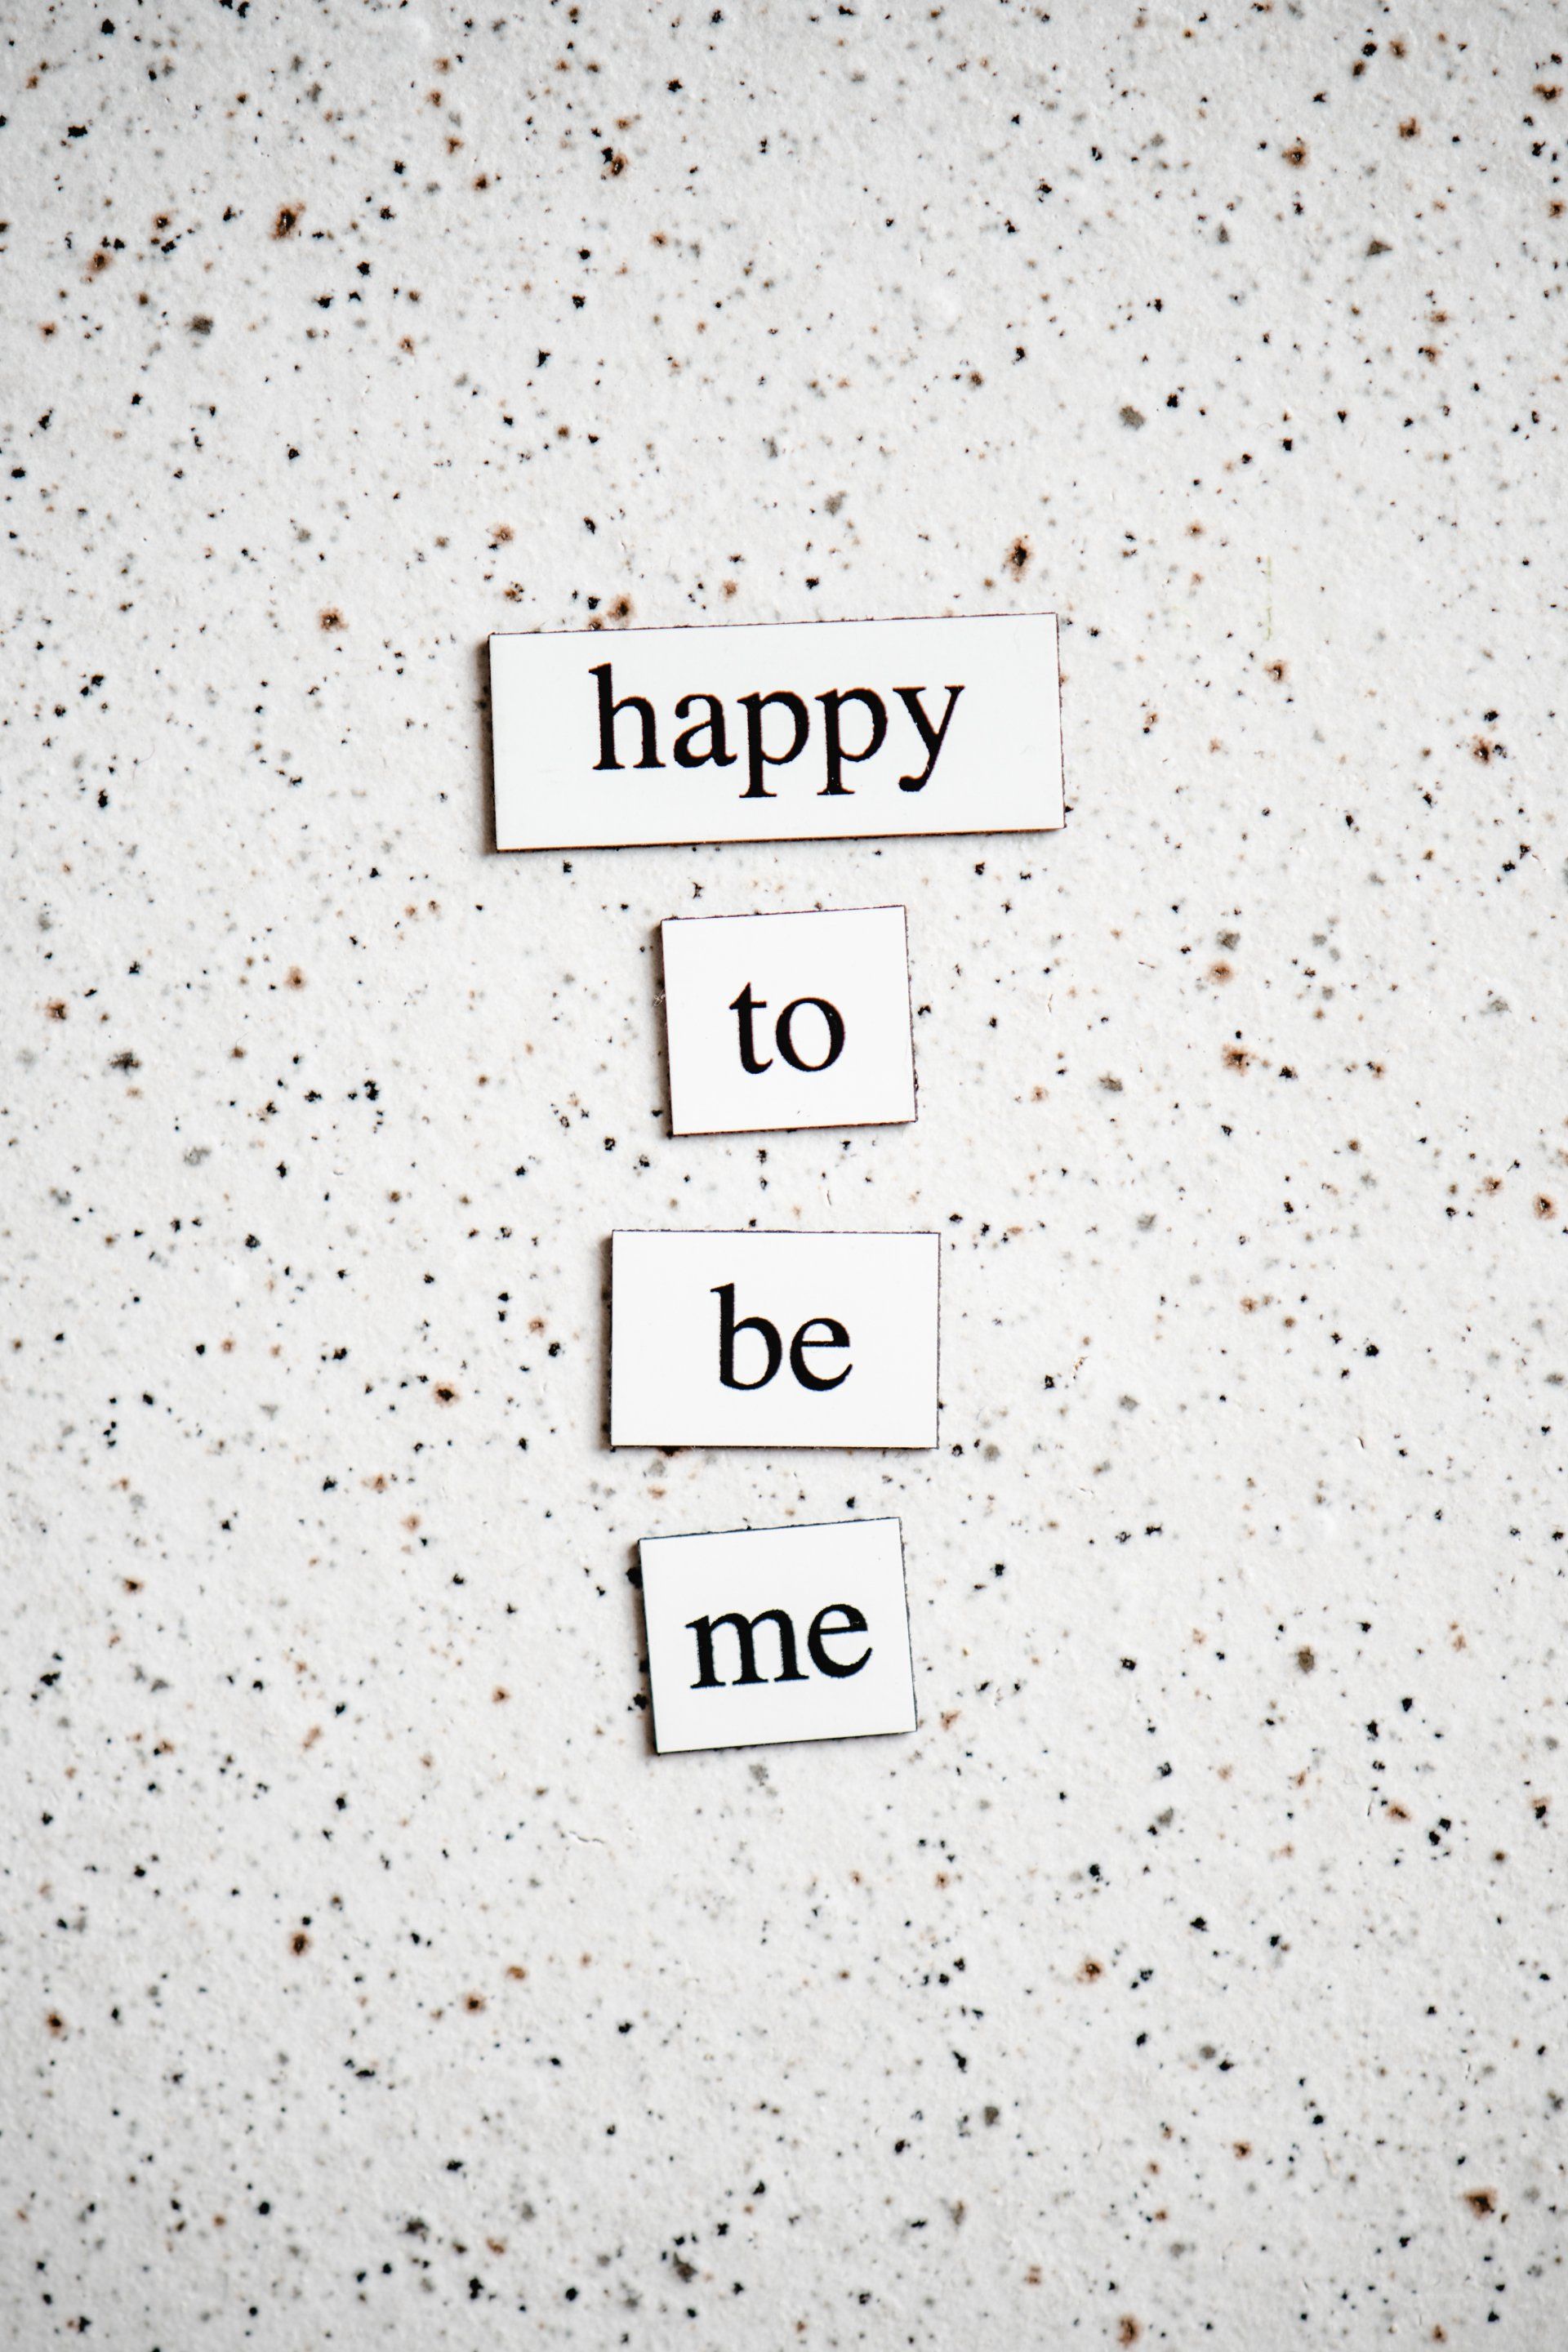 The words happy to be me are written on a piece of paper